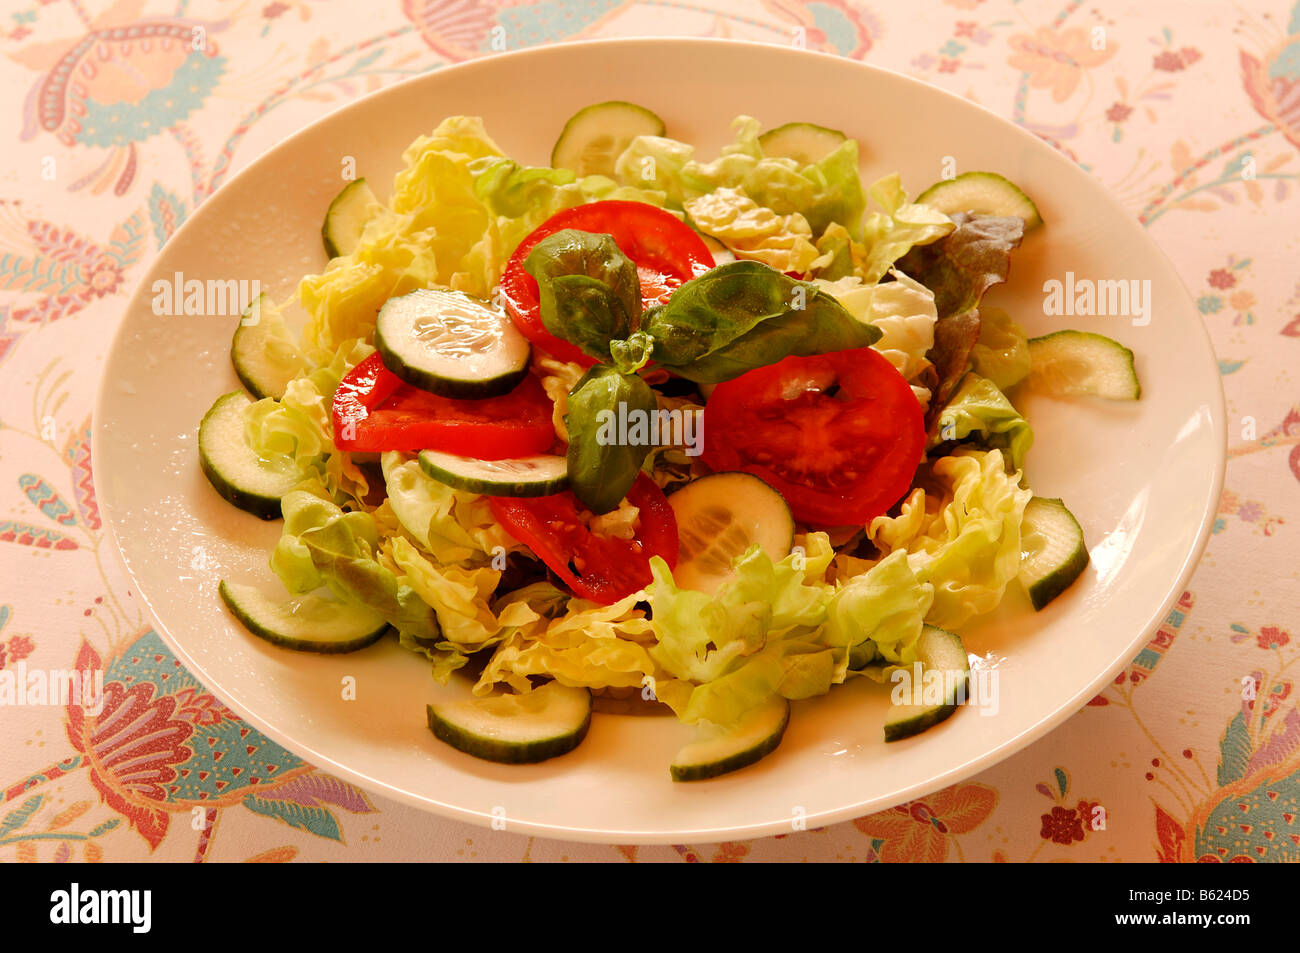 Fresh tossed salad on a plate Stock Photo